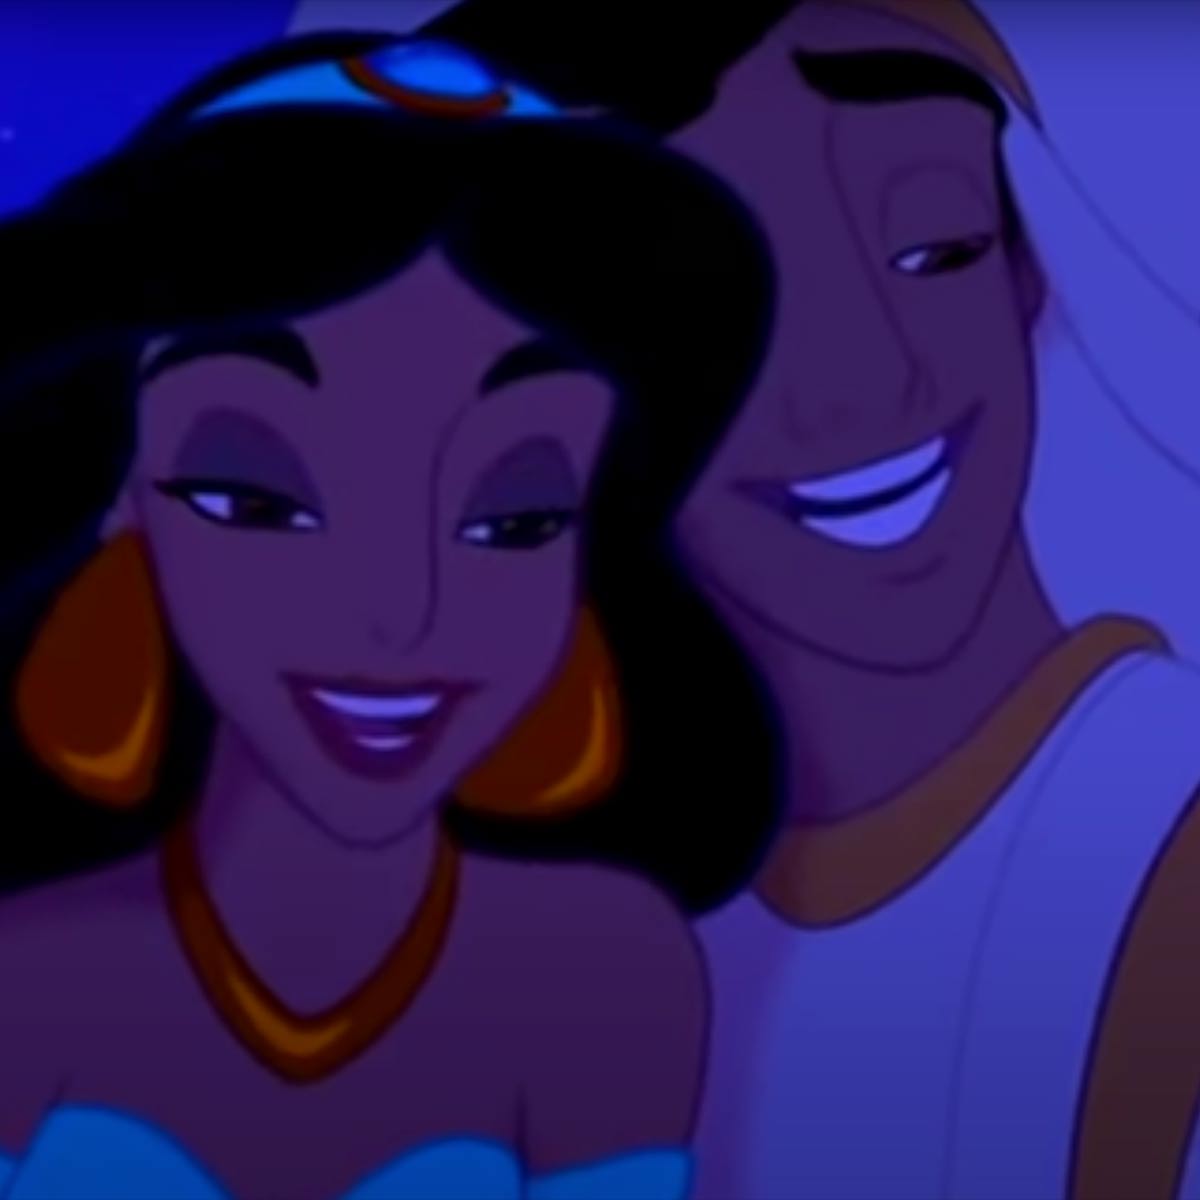 Play A Whole New World Aladdin Easy Piano Music Sheet On Virtual Piano - tale as old as time roblox piano roblox royale high